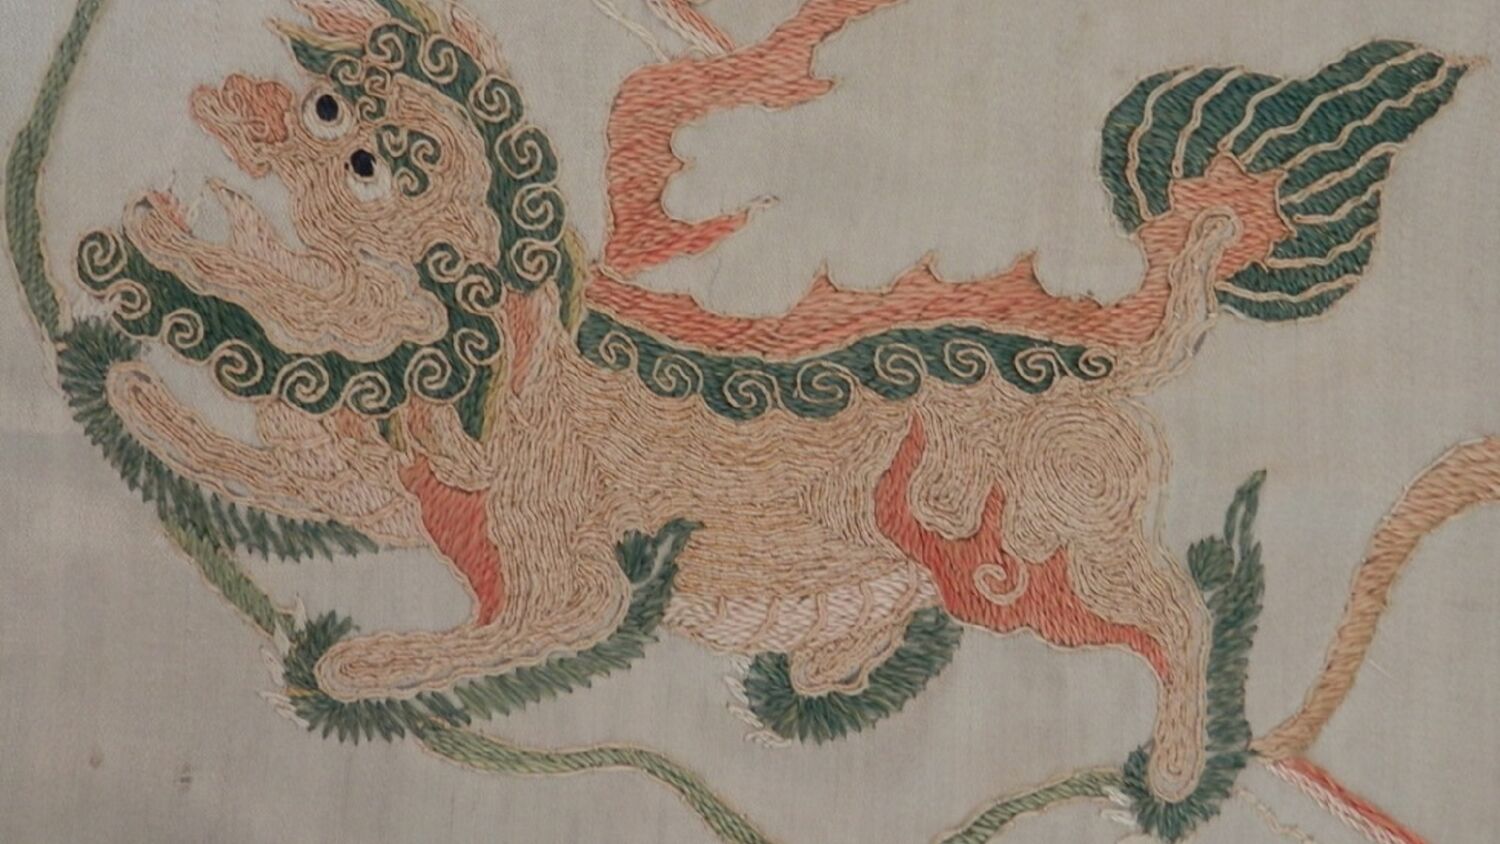 A close-up image of an embroidered Chinese-style lion on a silk panel. The lion is sewn in green, red and orange thread.